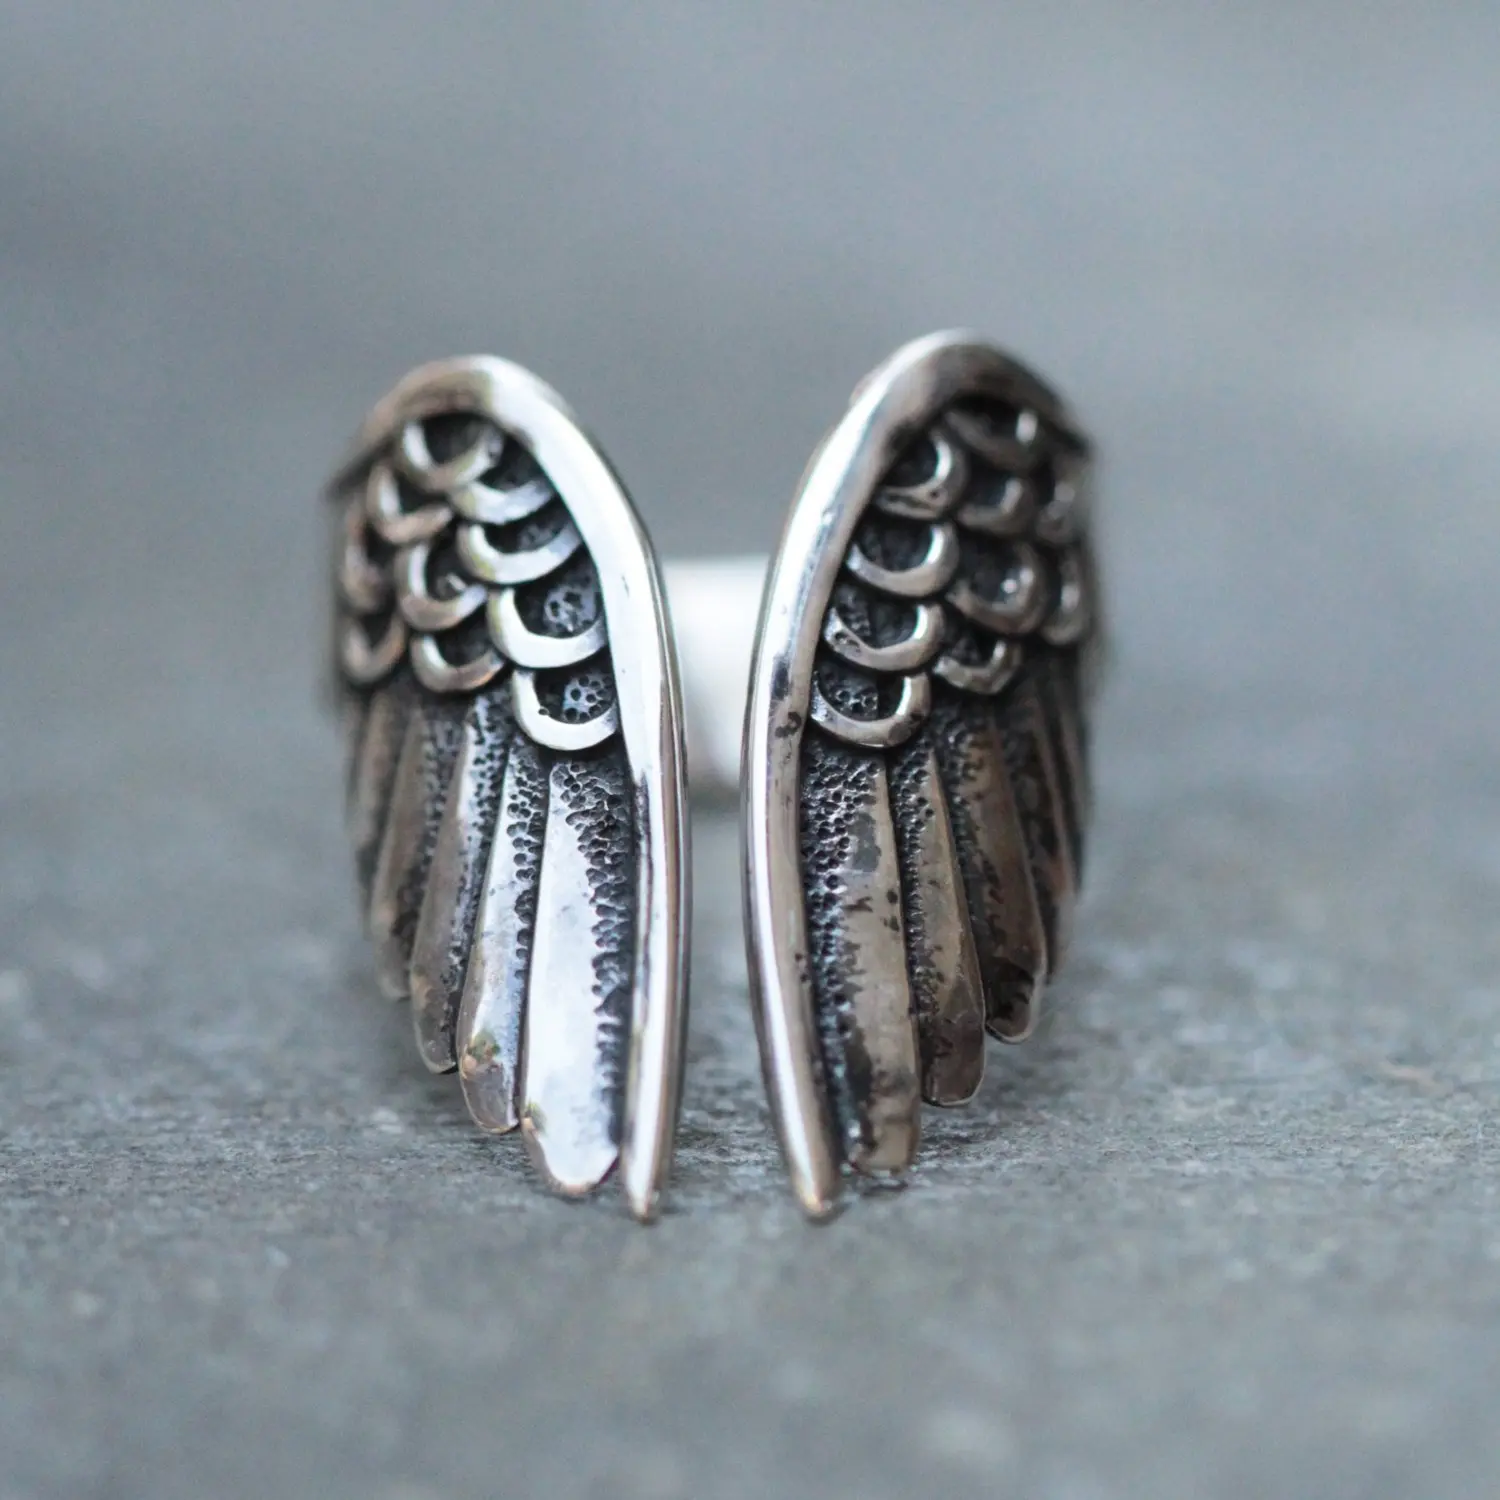 

Retro angel wings hard alloy men's ring classic punk style jewelry accessories adjustable size jewlery for women